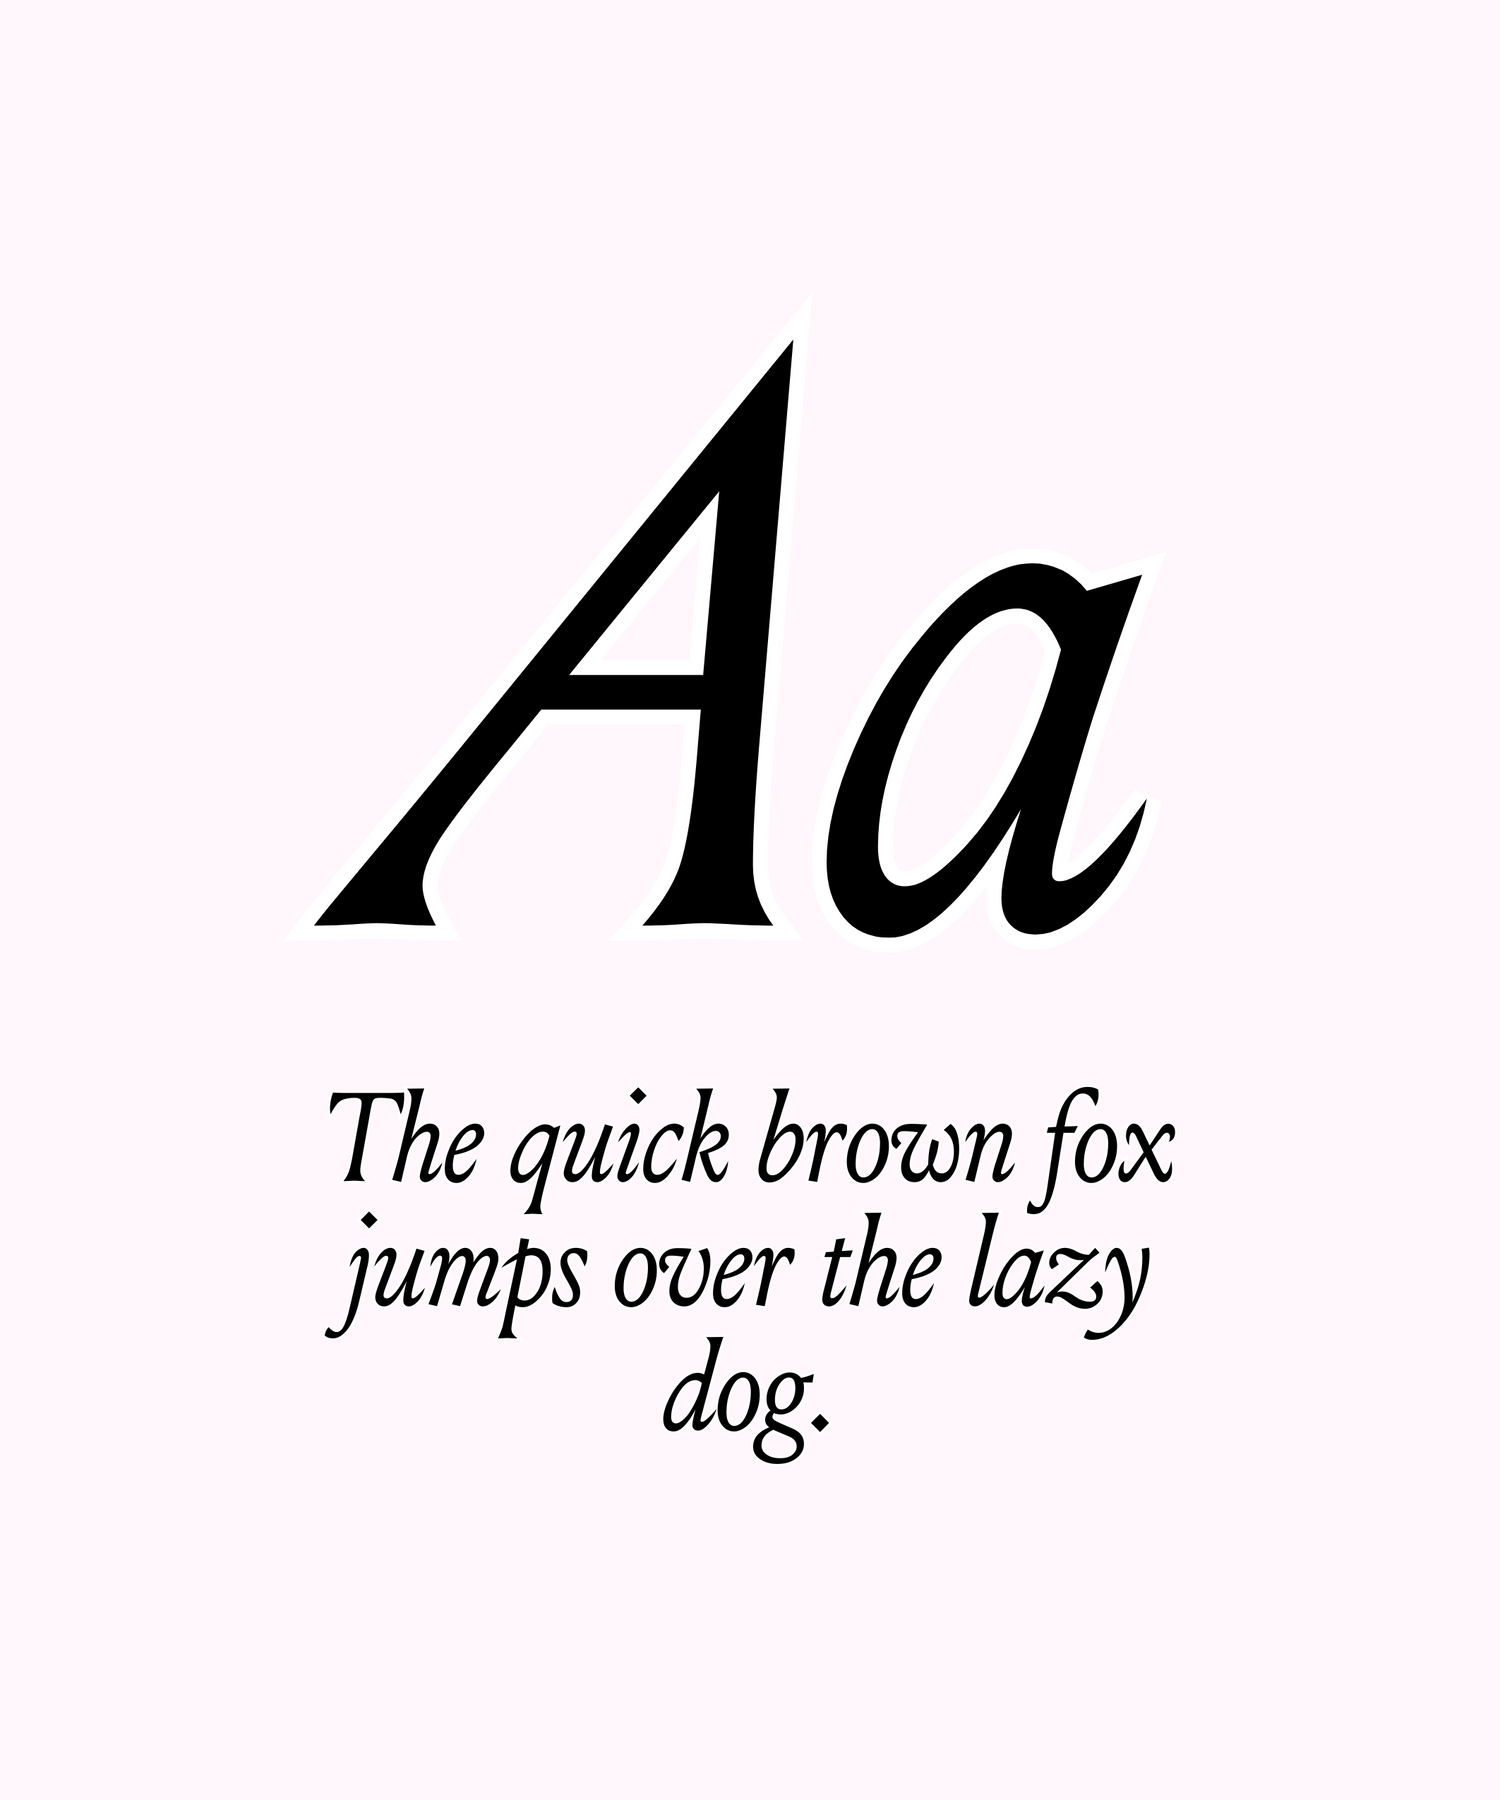 The letters 'Aa' with subtext: The quick brown fox jumps over the lazy dog. 